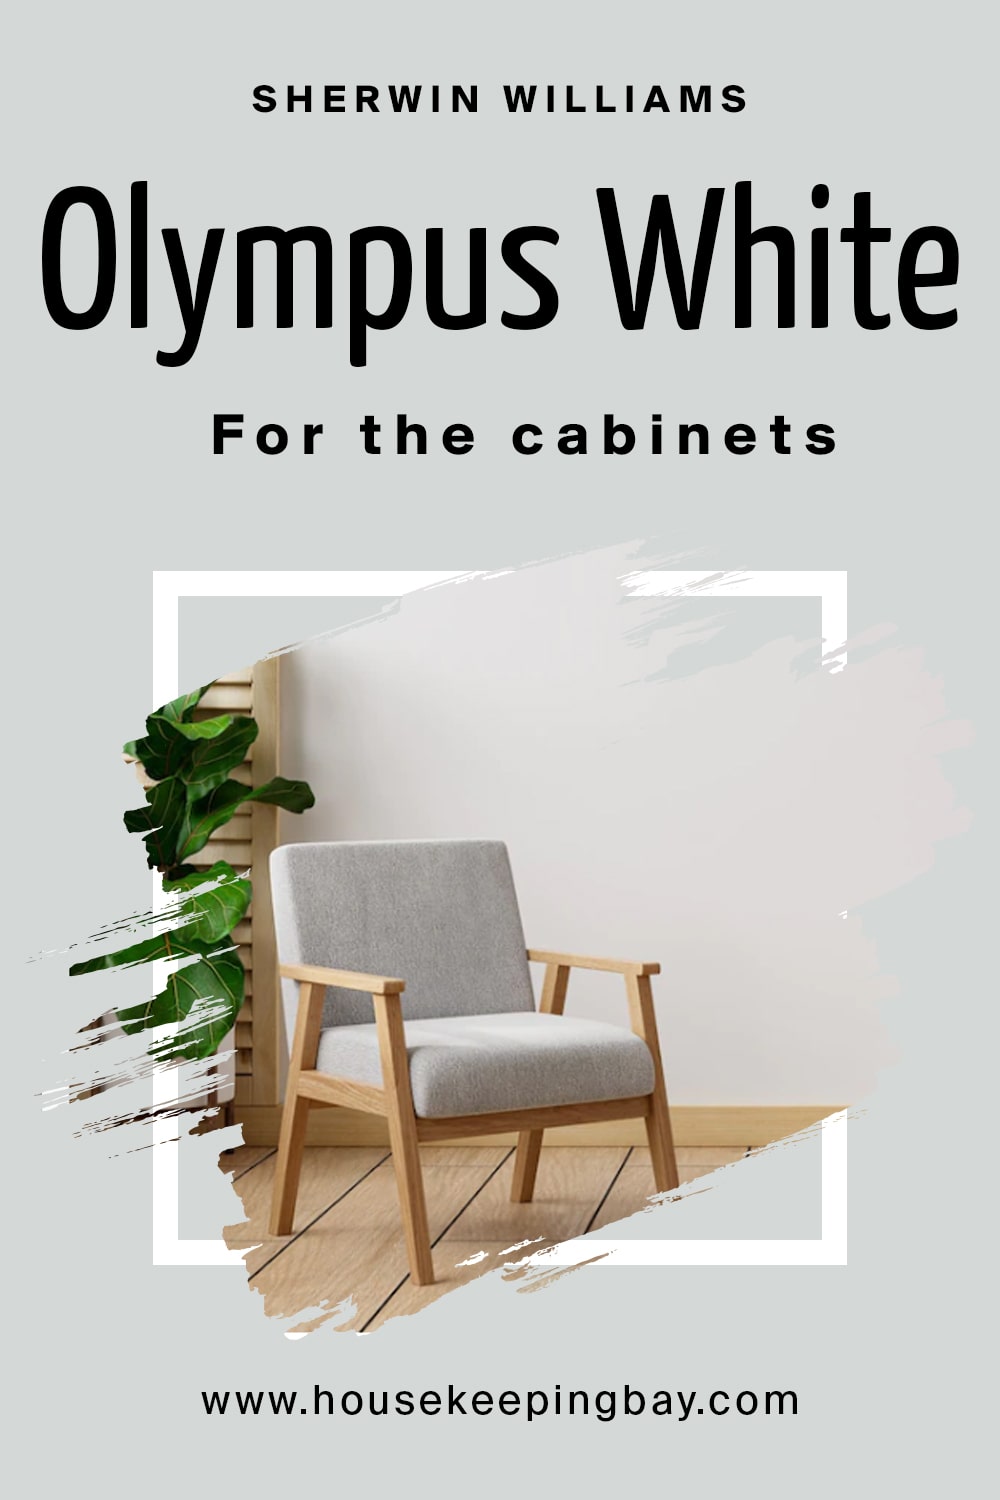 Sherwin Williams.Olympus White For the cabinets